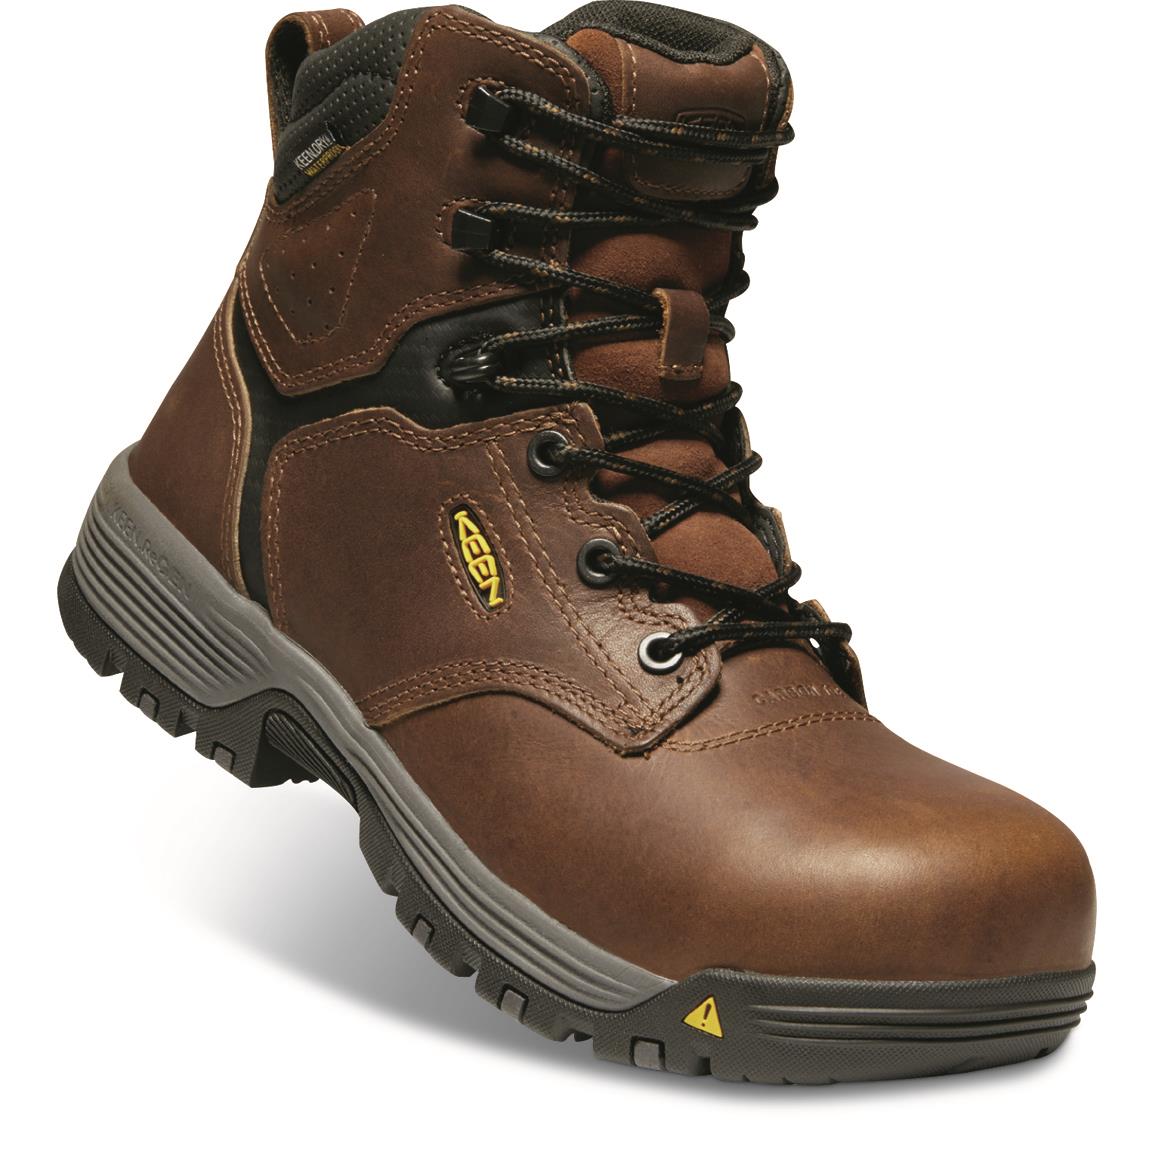 KEEN Utility Women's Chicago Waterproof Safety Toe Work Boots, Tobacco/black